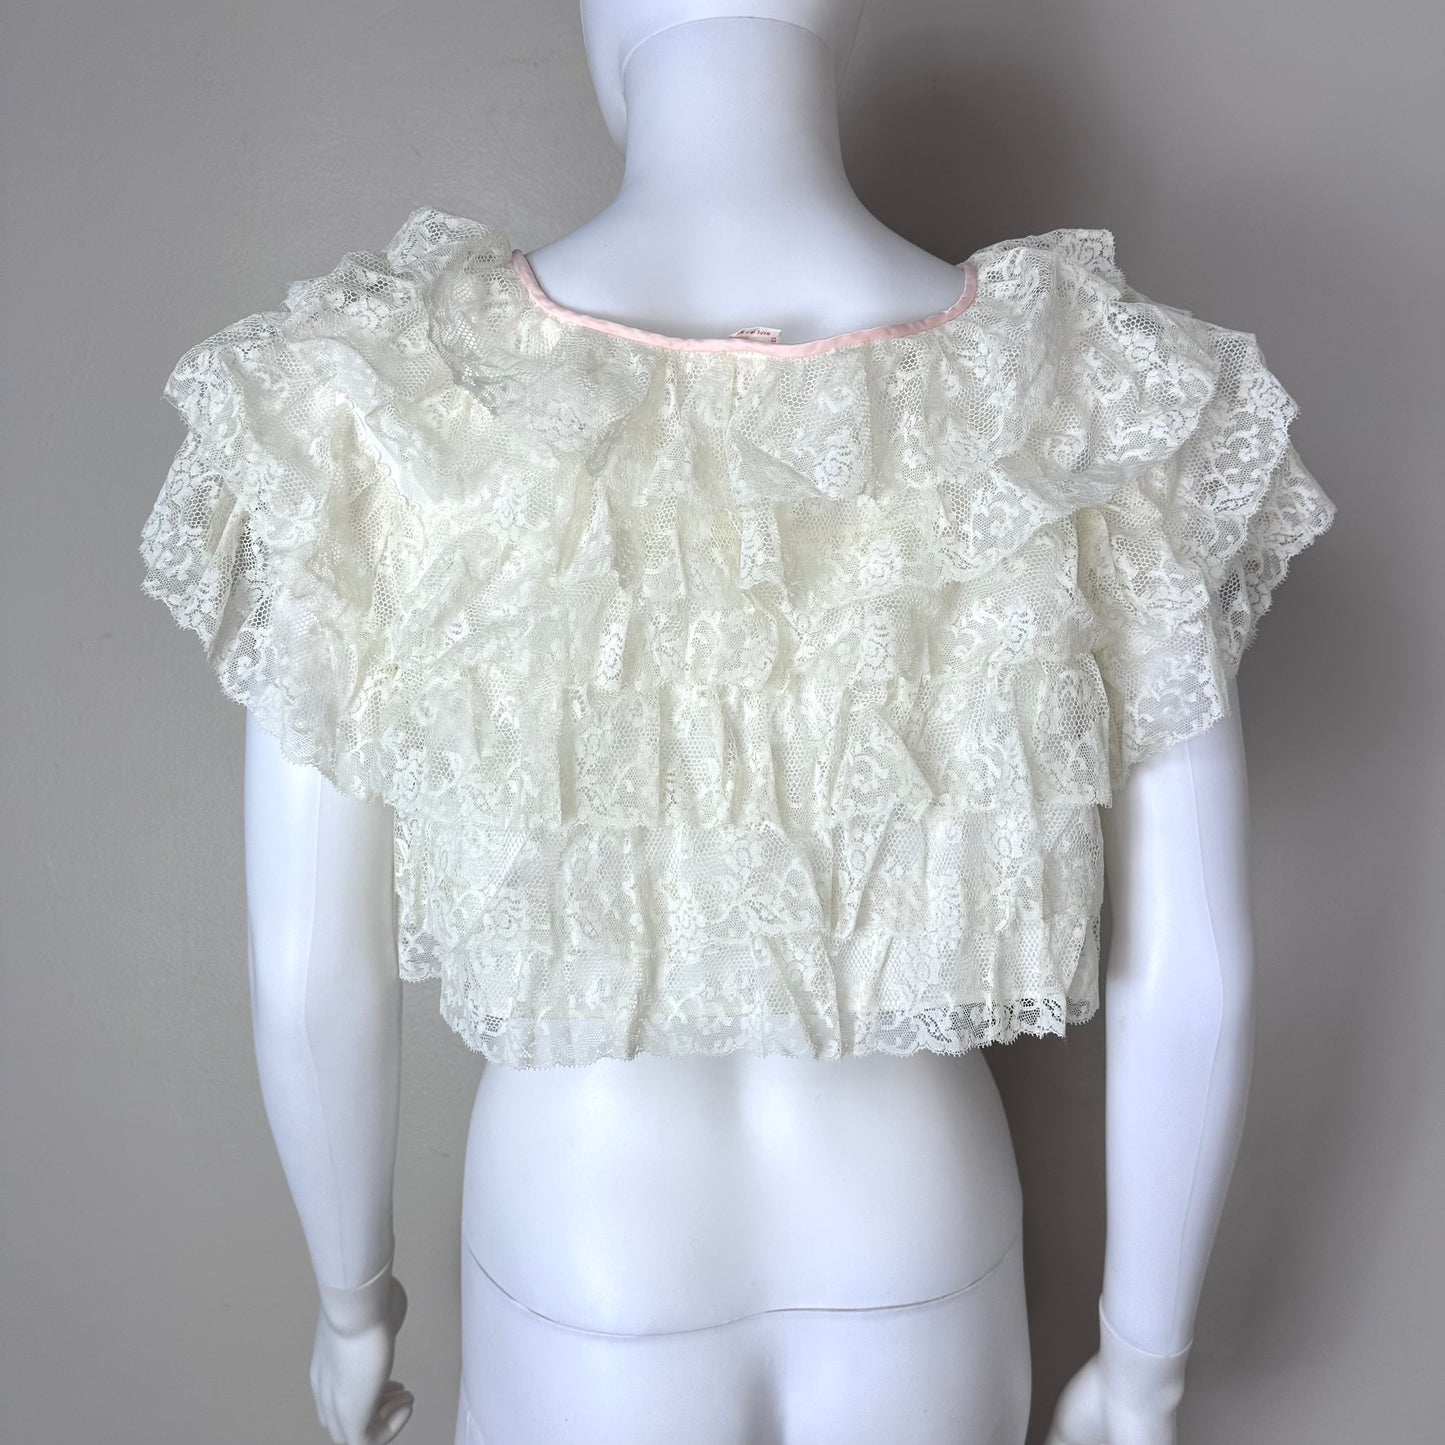 1950s Lace Ruffle Bed Jacket, Chevette Size Small